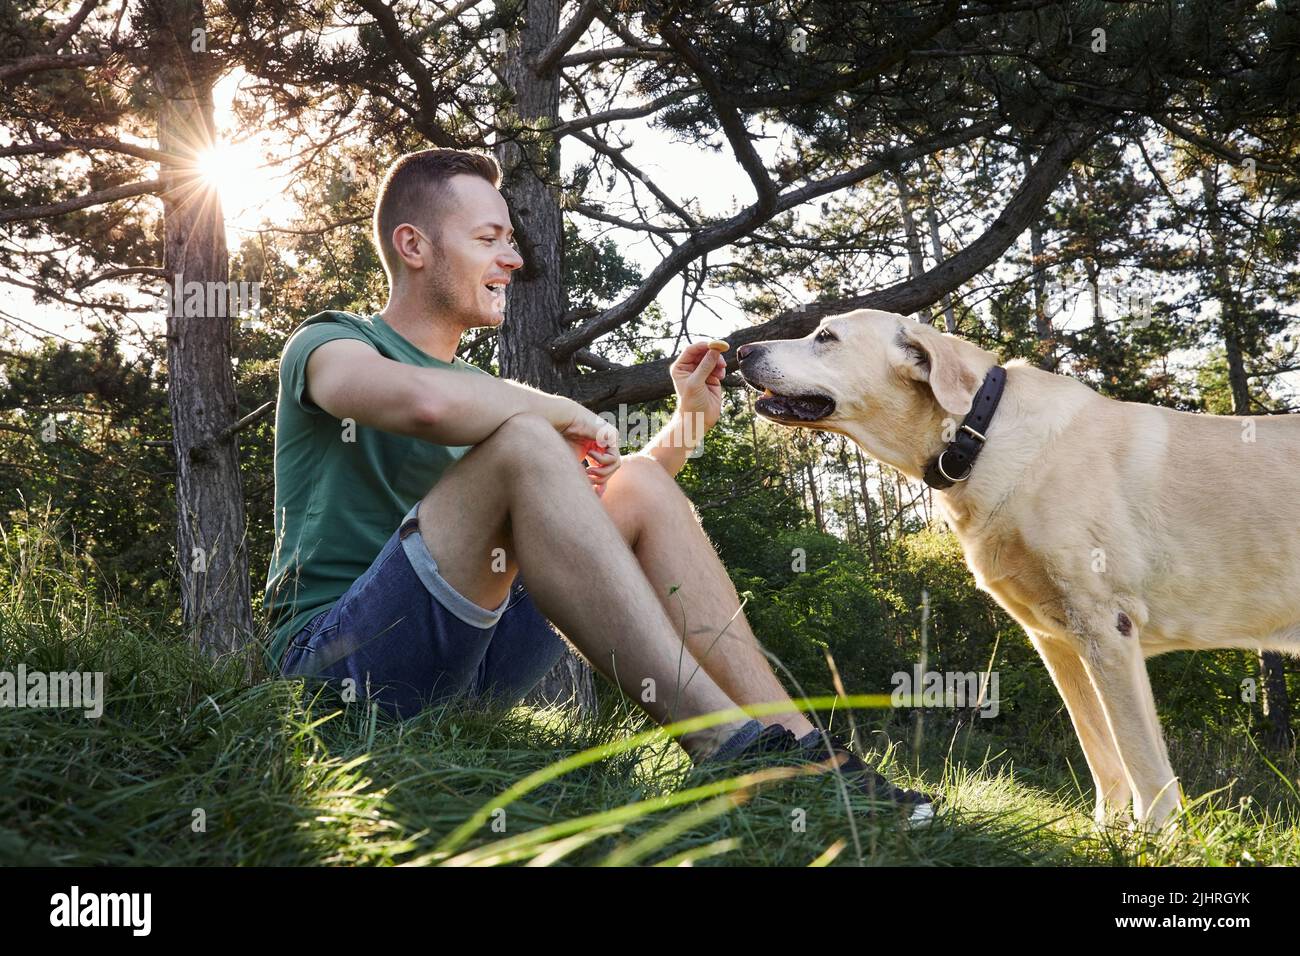 Man with his dog sitting in grass under tree during sunny summer day. Pet owner holding cookie for his cute labrador retriever. Stock Photo